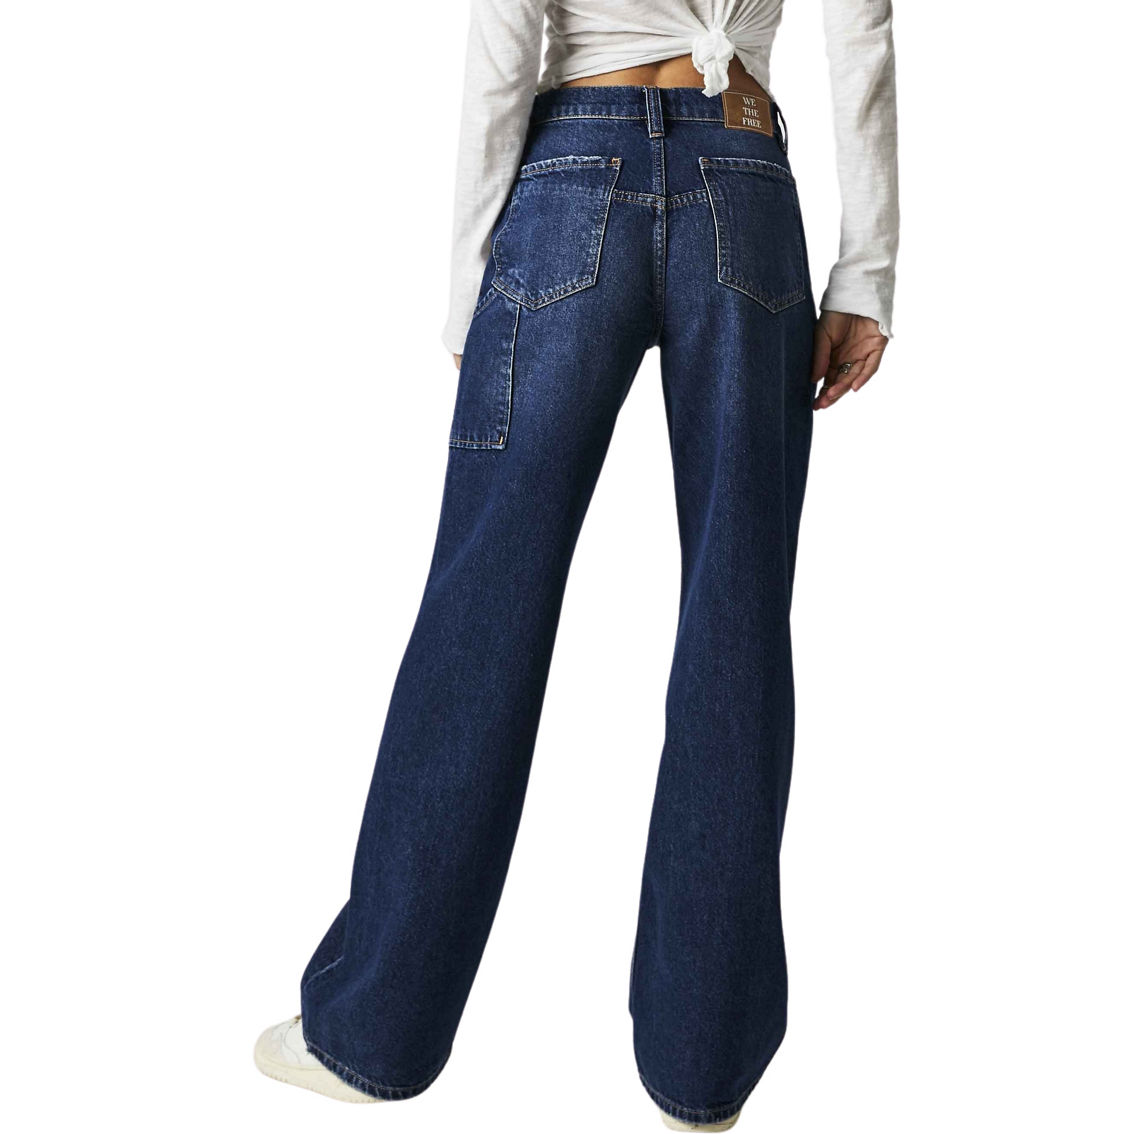 Free People We The Free Tinsley Baggy High Rise Jeans - Image 2 of 4